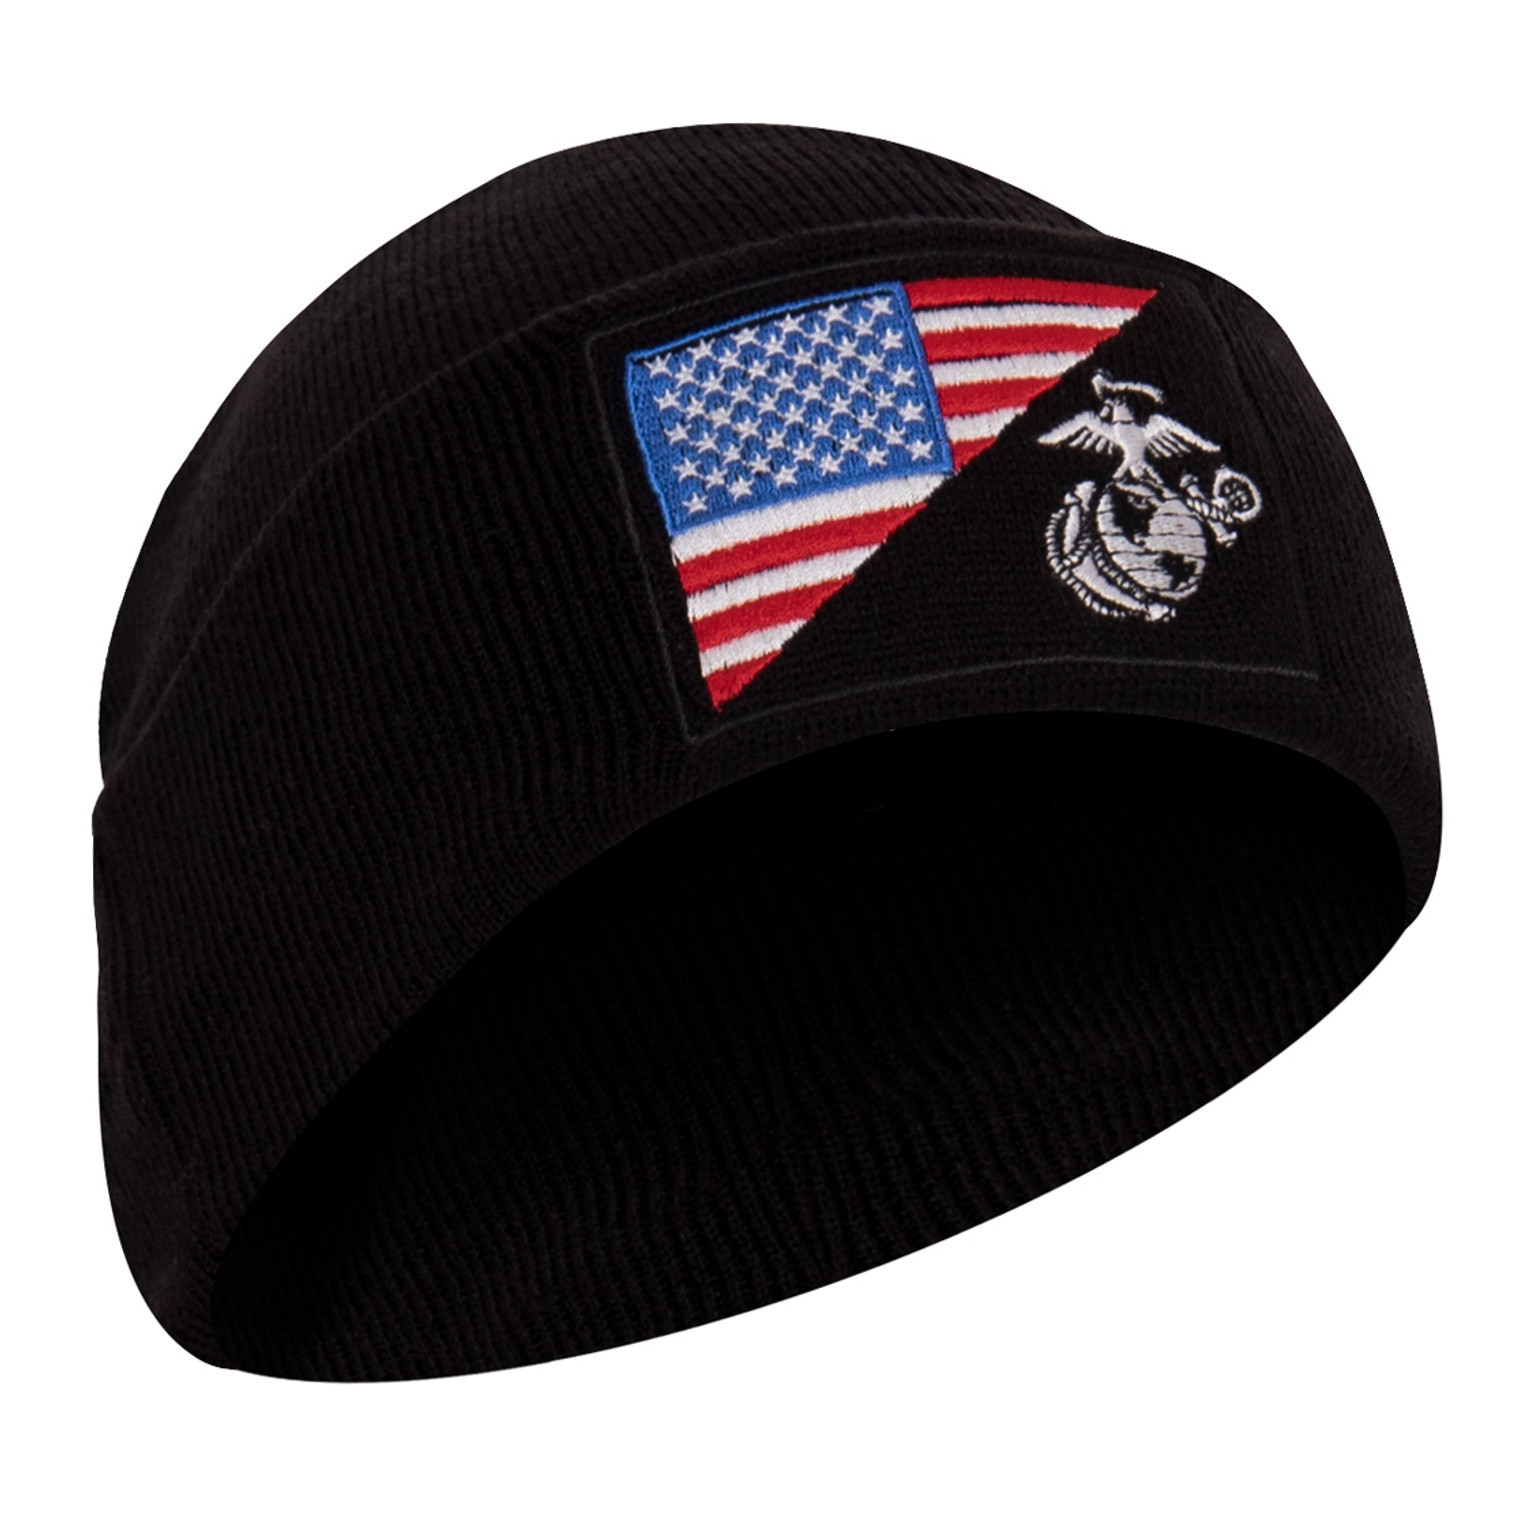 Rothco USMC Eagle, Globe and Anchor/US Flag Deluxe Fine Knit Watch Cap - Black